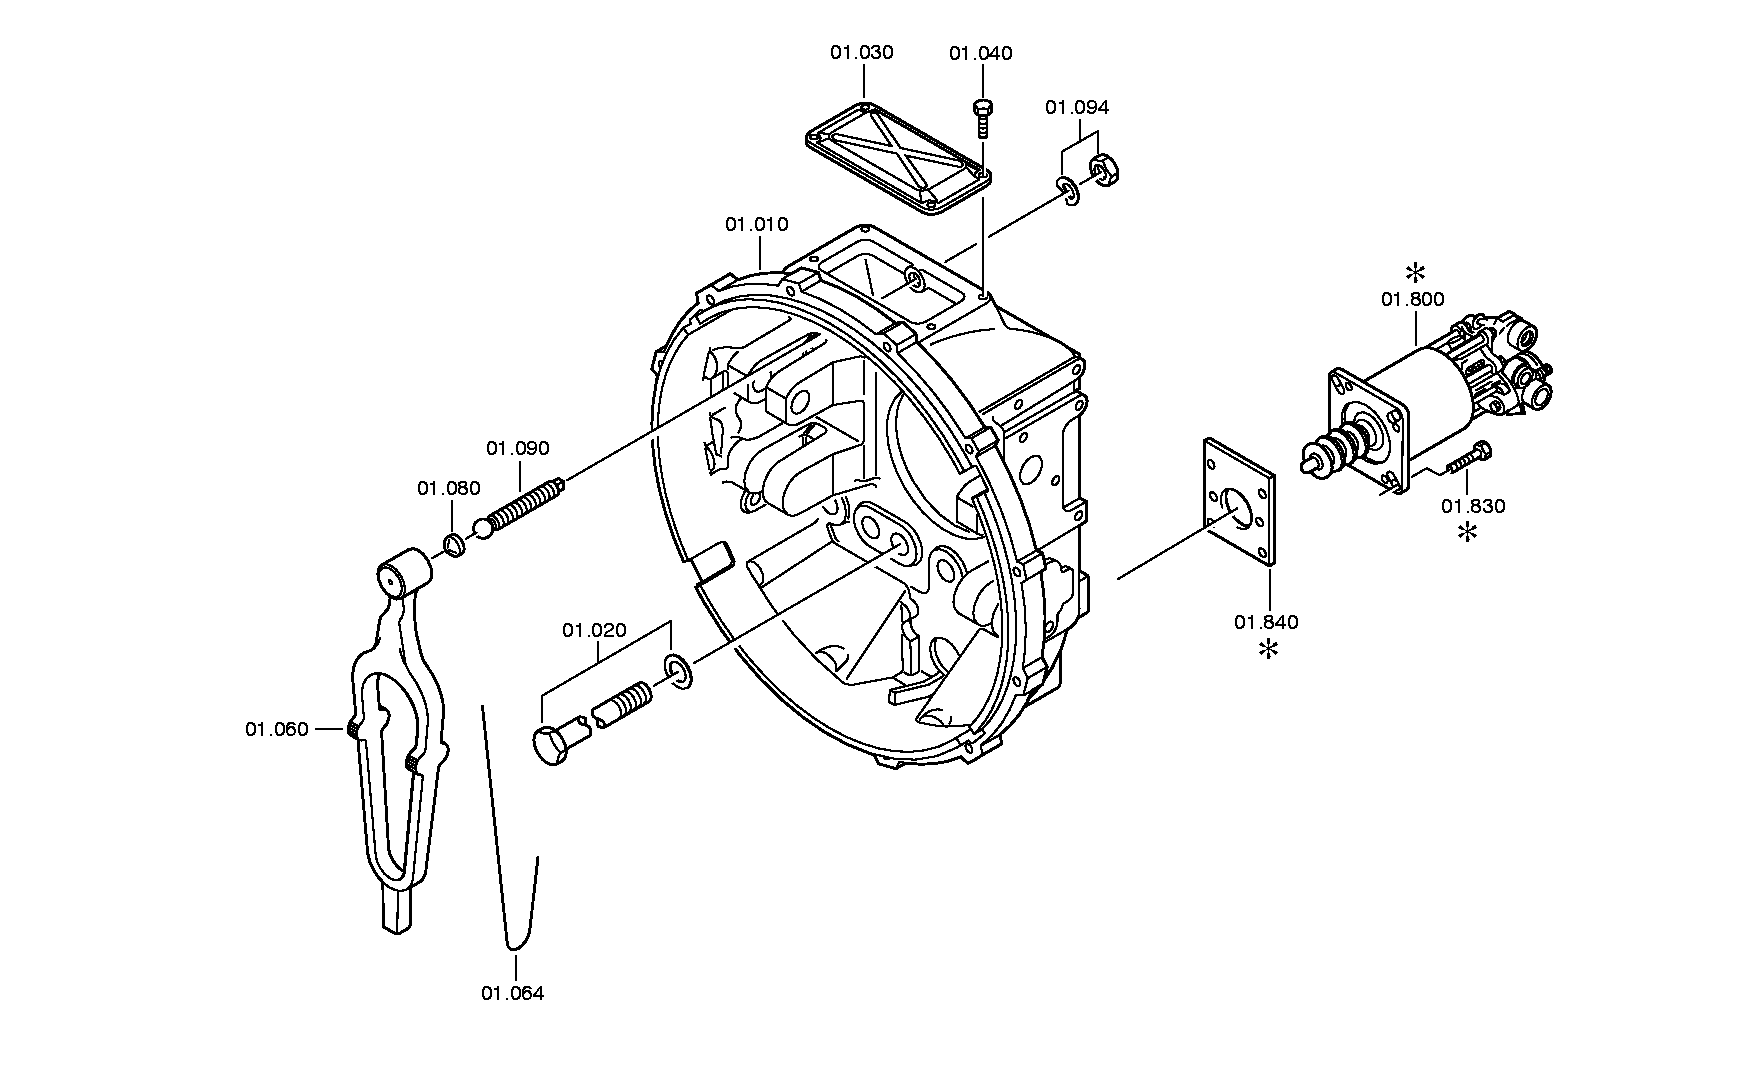 drawing for ASIA MOTORS CO. INC. 409-01-0407 - RELEASE FORK (figure 5)